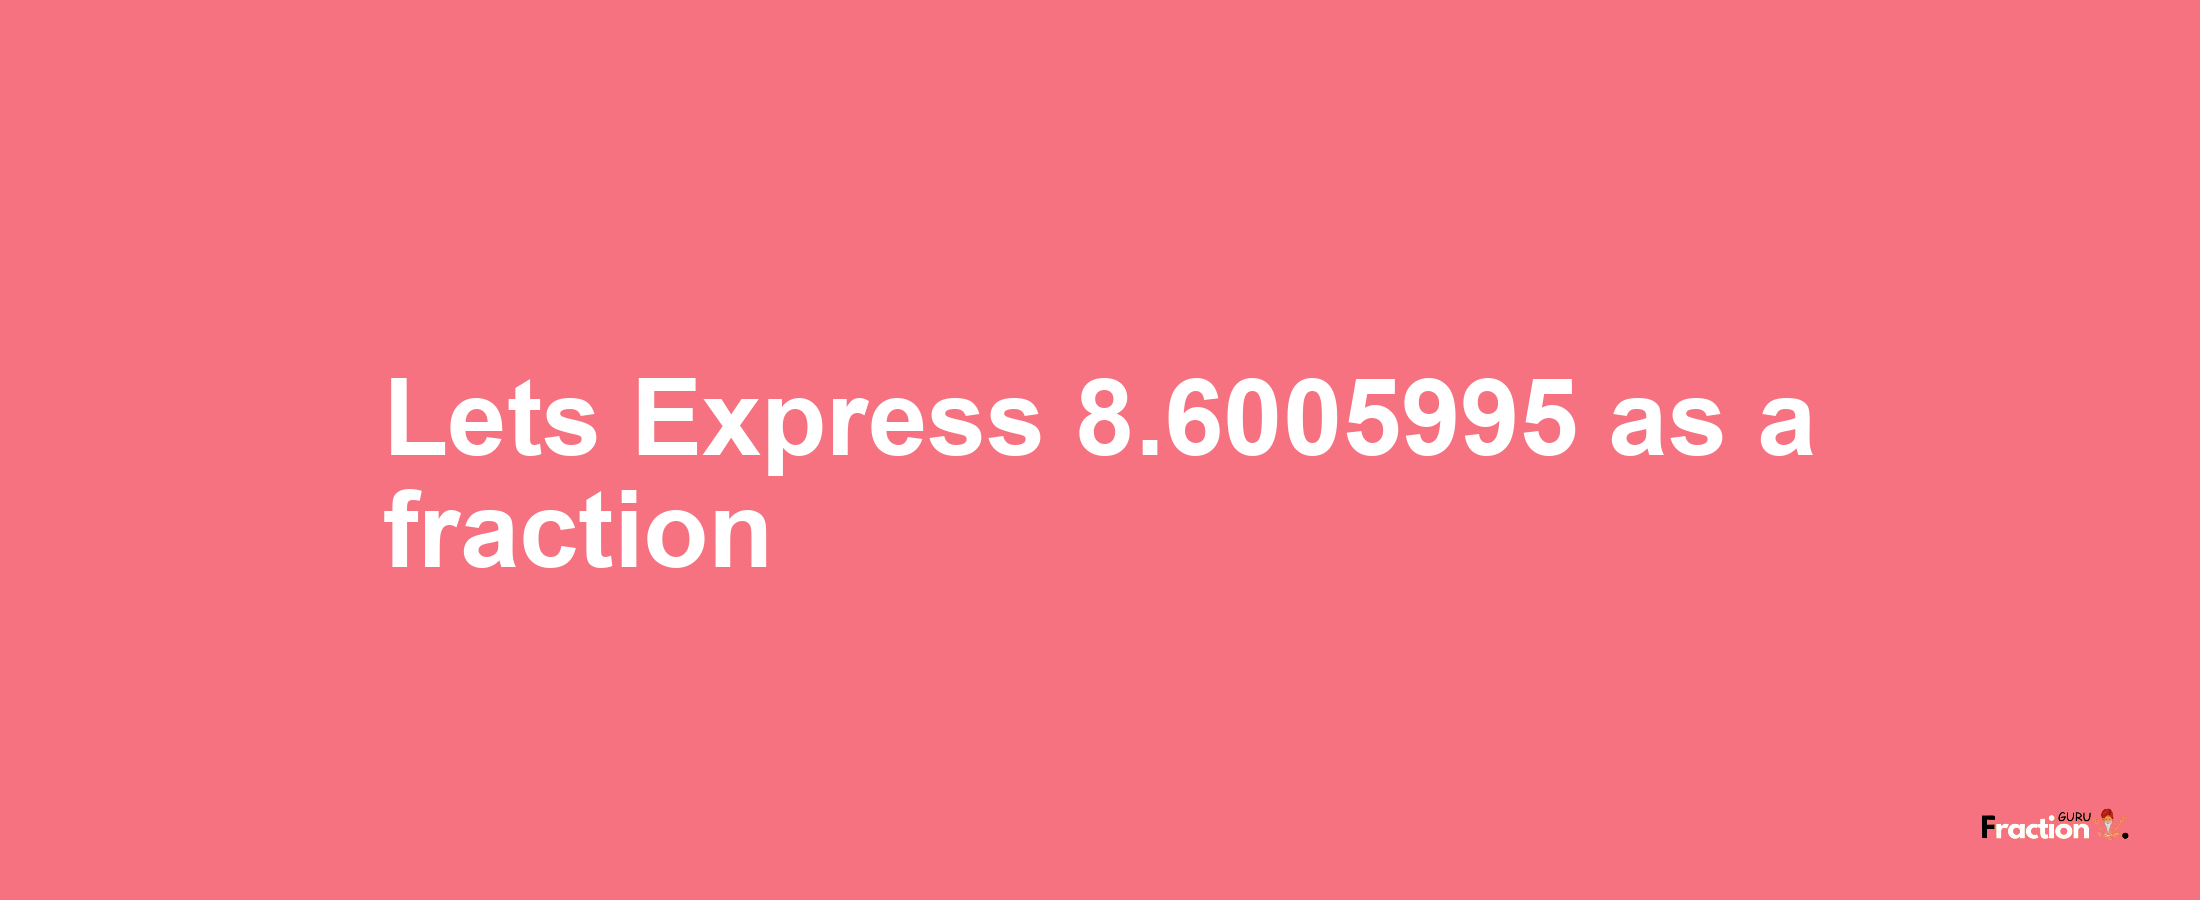 Lets Express 8.6005995 as afraction